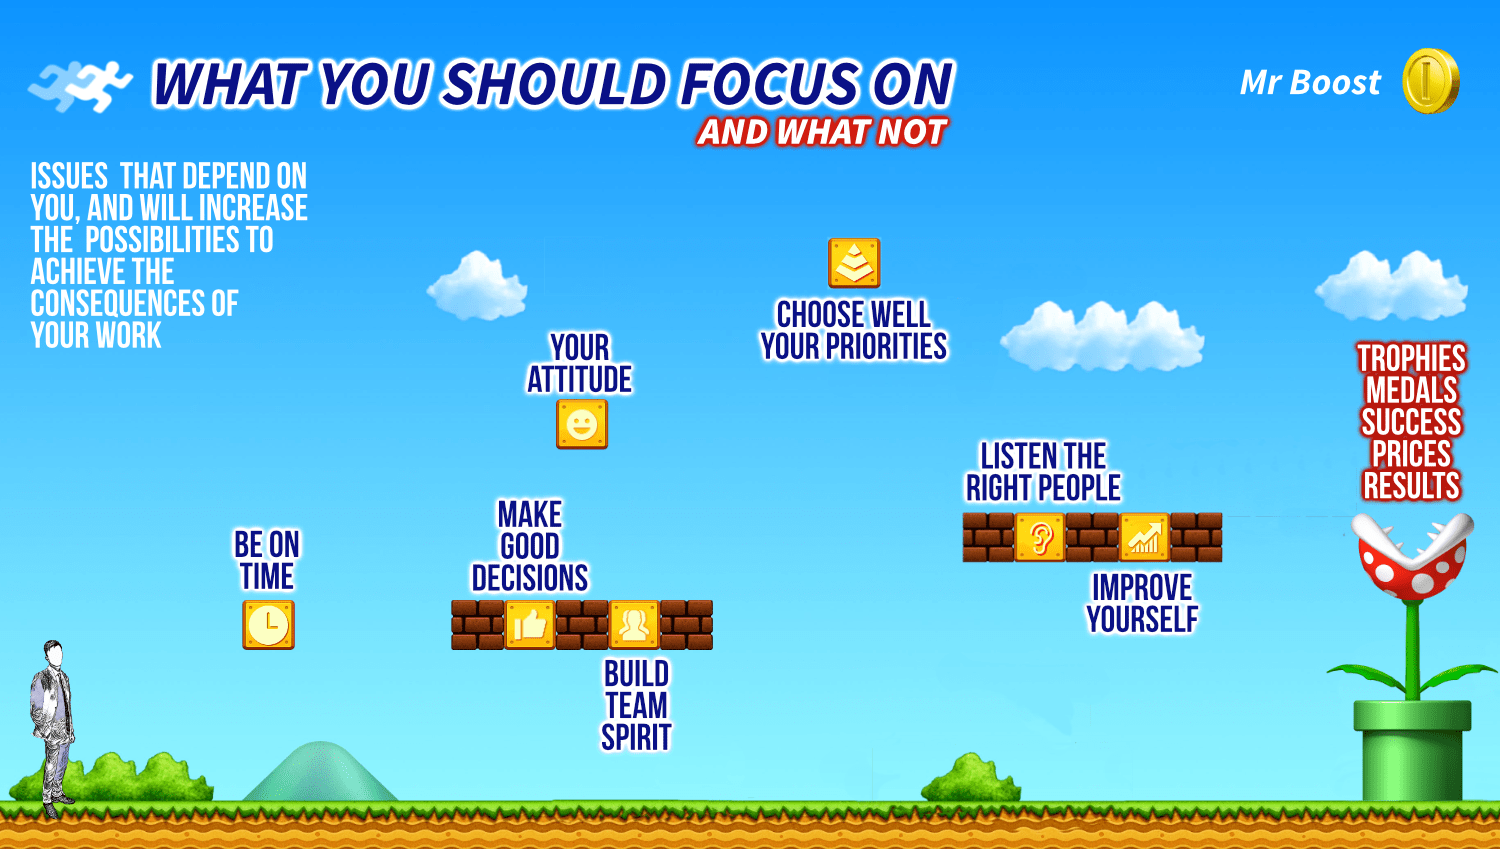 What you should focus on?